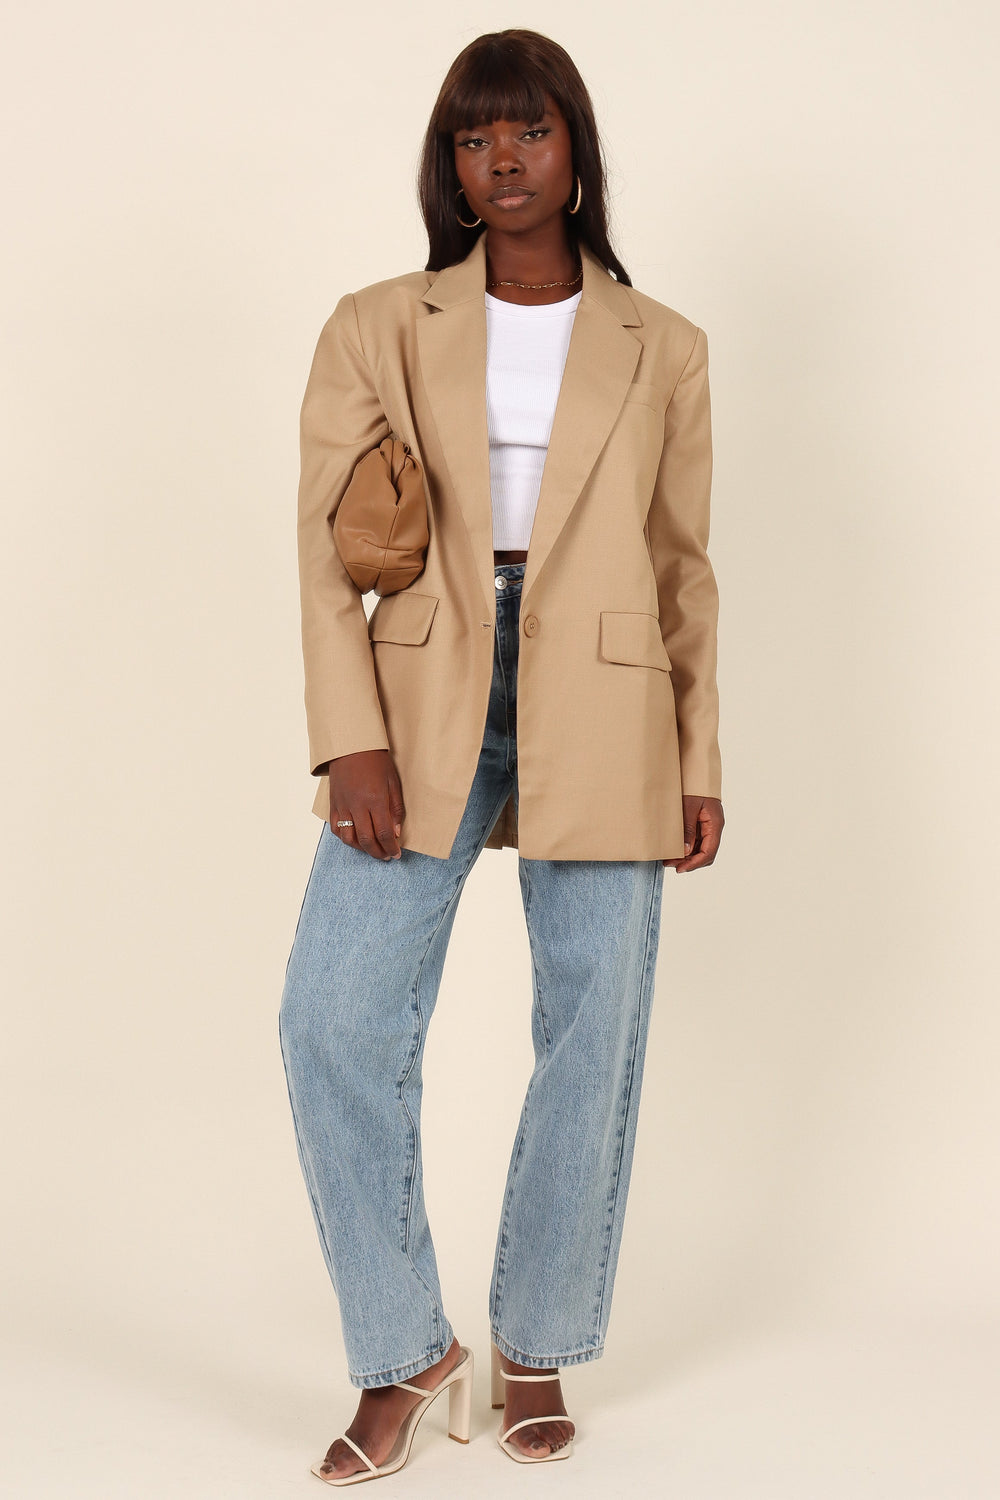 Petal and Pup USA OUTERWEAR Welcome To The Jungle Blazer - Beige